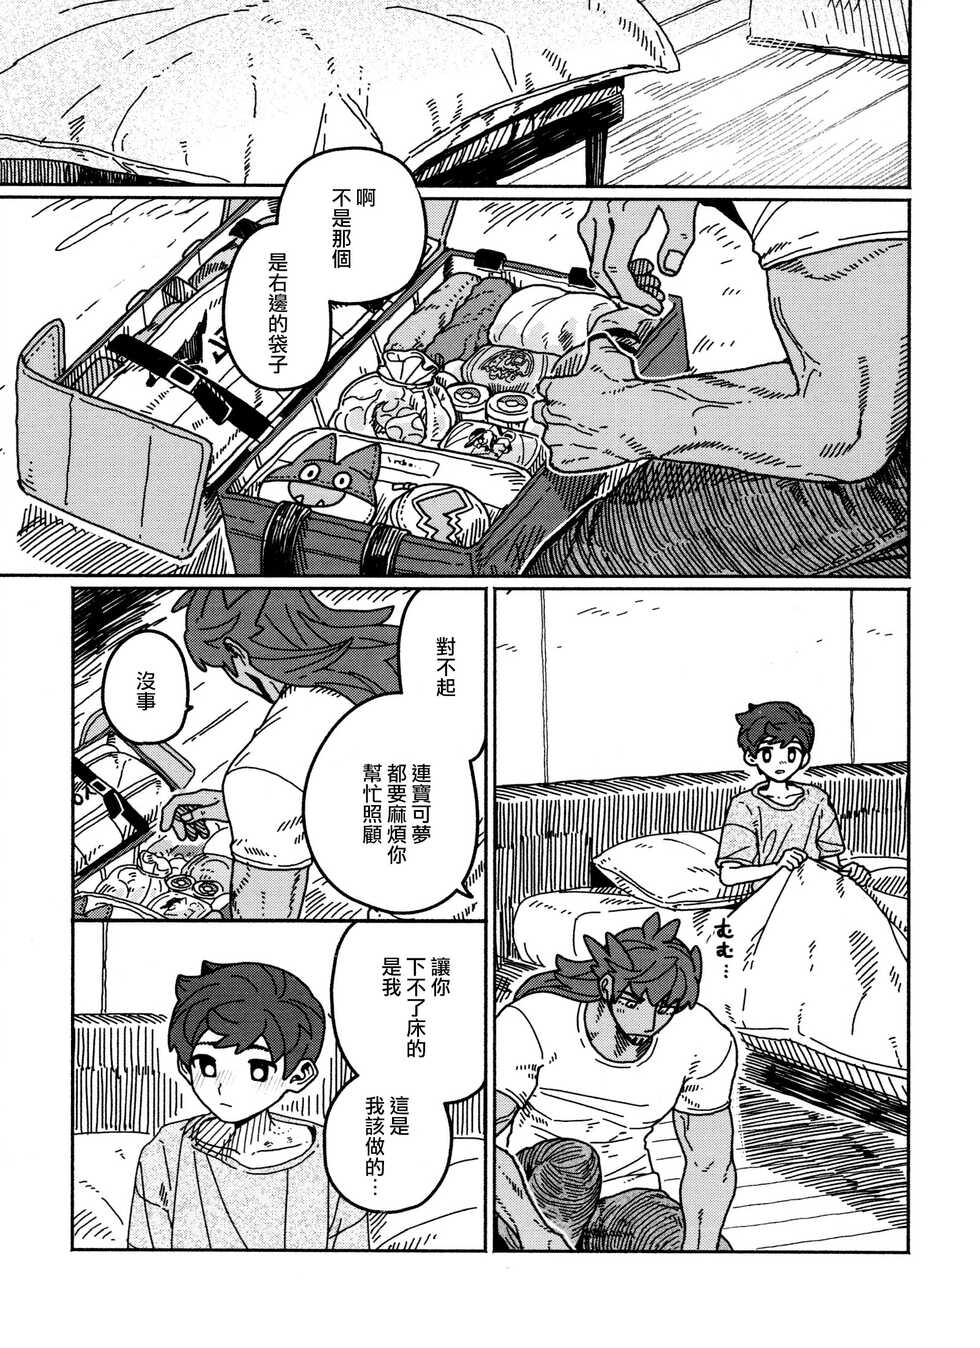 (0411#Airboo 2021) [Chikuwa to New Town (03)] Koi no Kyoukasho (Pokémon Sword and Shield) [Chinese] [路过的骑士汉化组] - Page 35